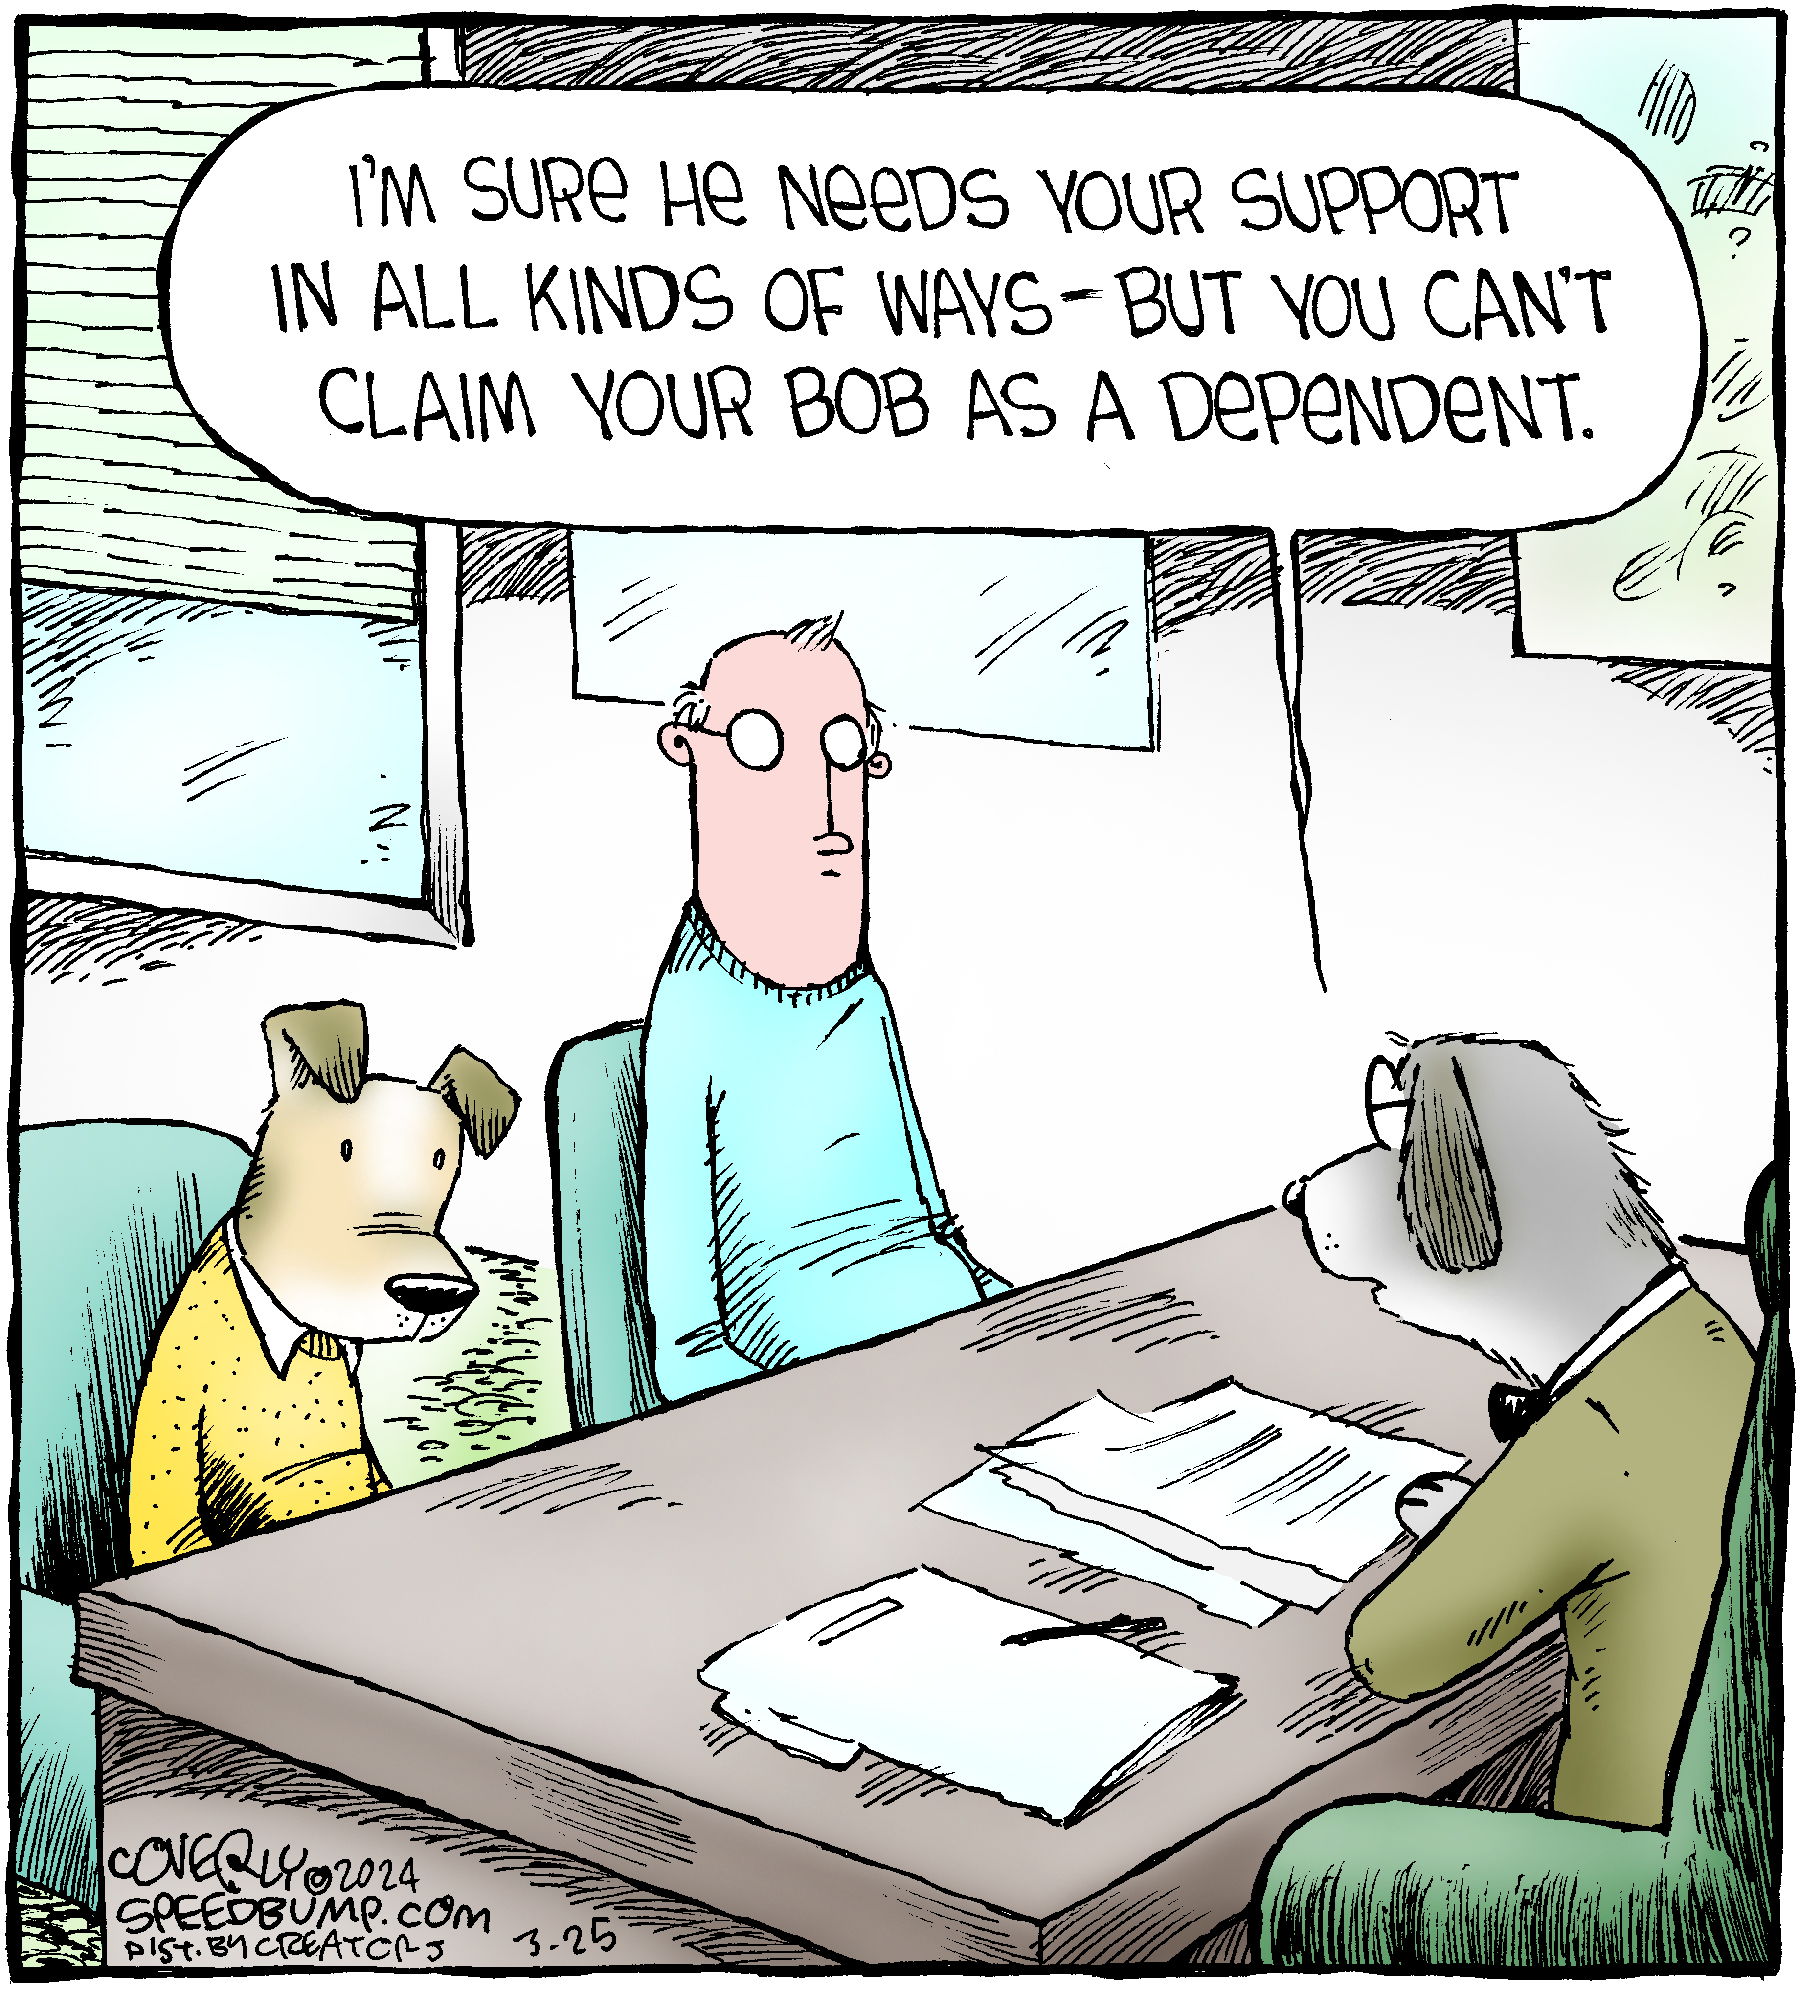 A man and a dog in a sweater sit at a desk across from another dog in a suit jacket. The dog in the suit jacket says "I'm sure he needs your support in all kinds of ways - but you can't claim your Bob as a dependent."